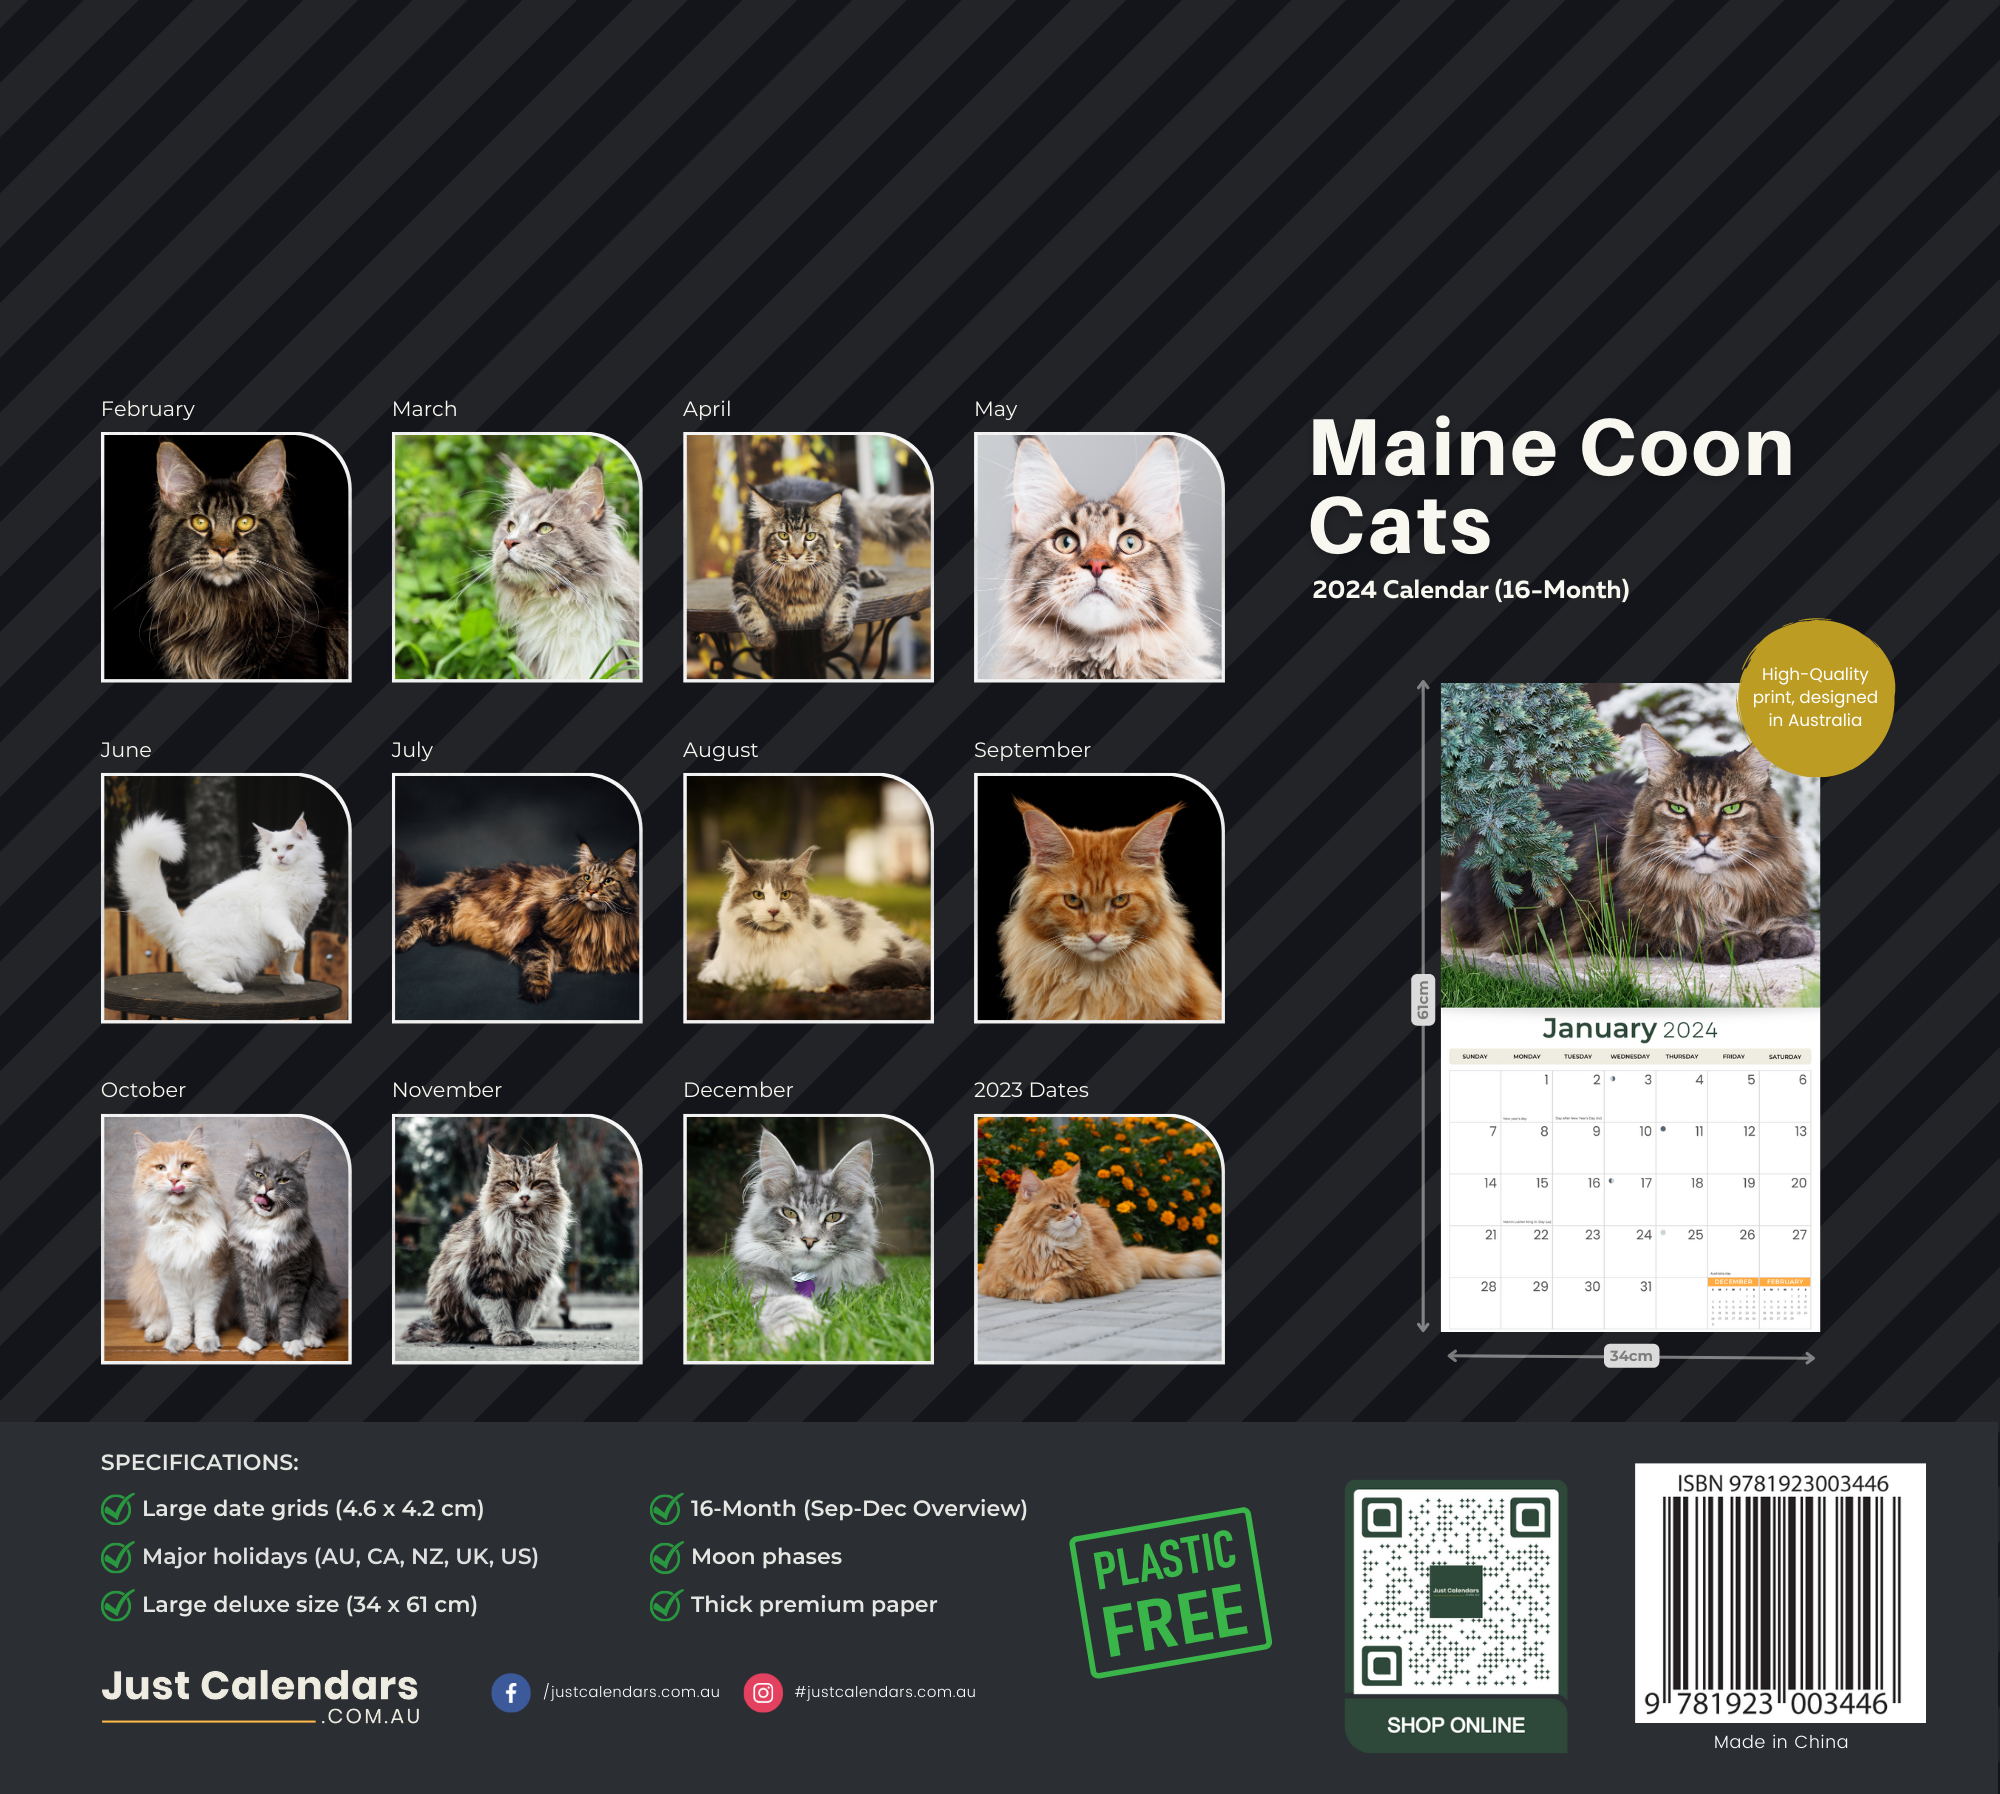 2024 Maine Coon Cats & Kittens - Deluxe Wall Calendar by Just Calendars - 16 Month - Plastic Free